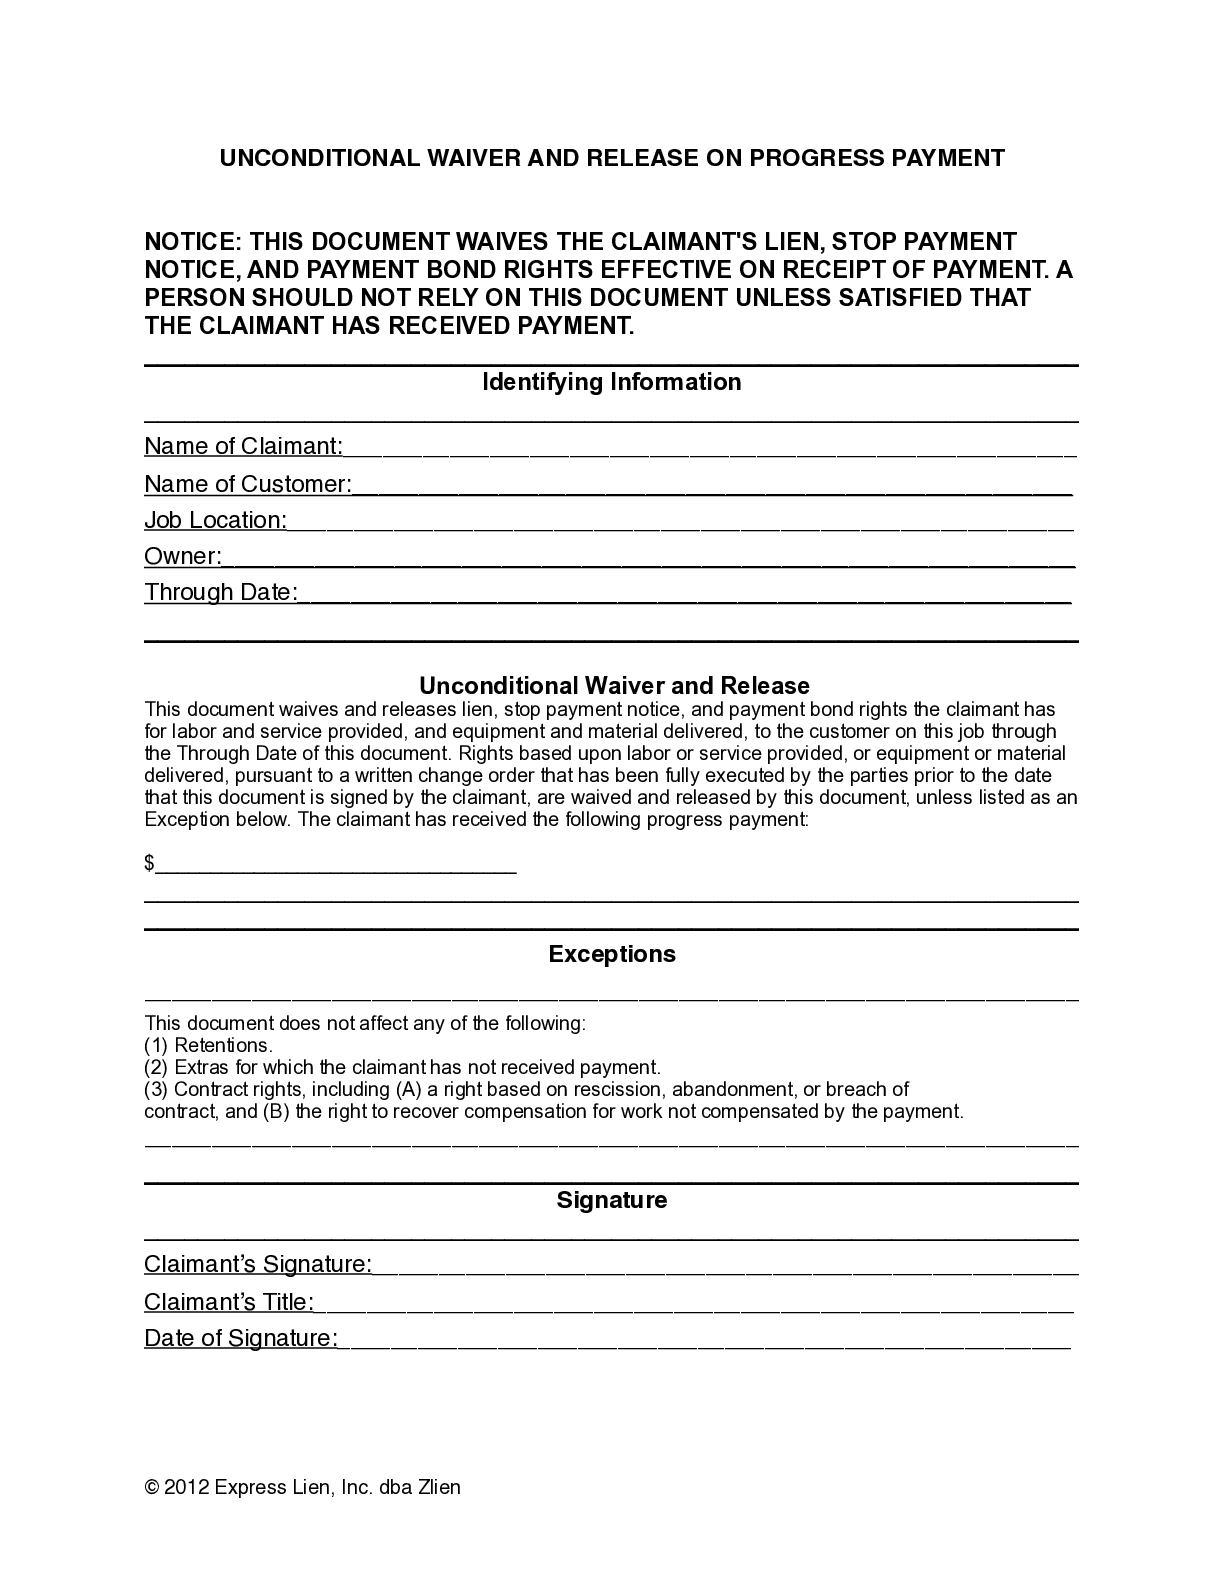 Minnesota Partial Unconditional Lien Waiver Form - free from